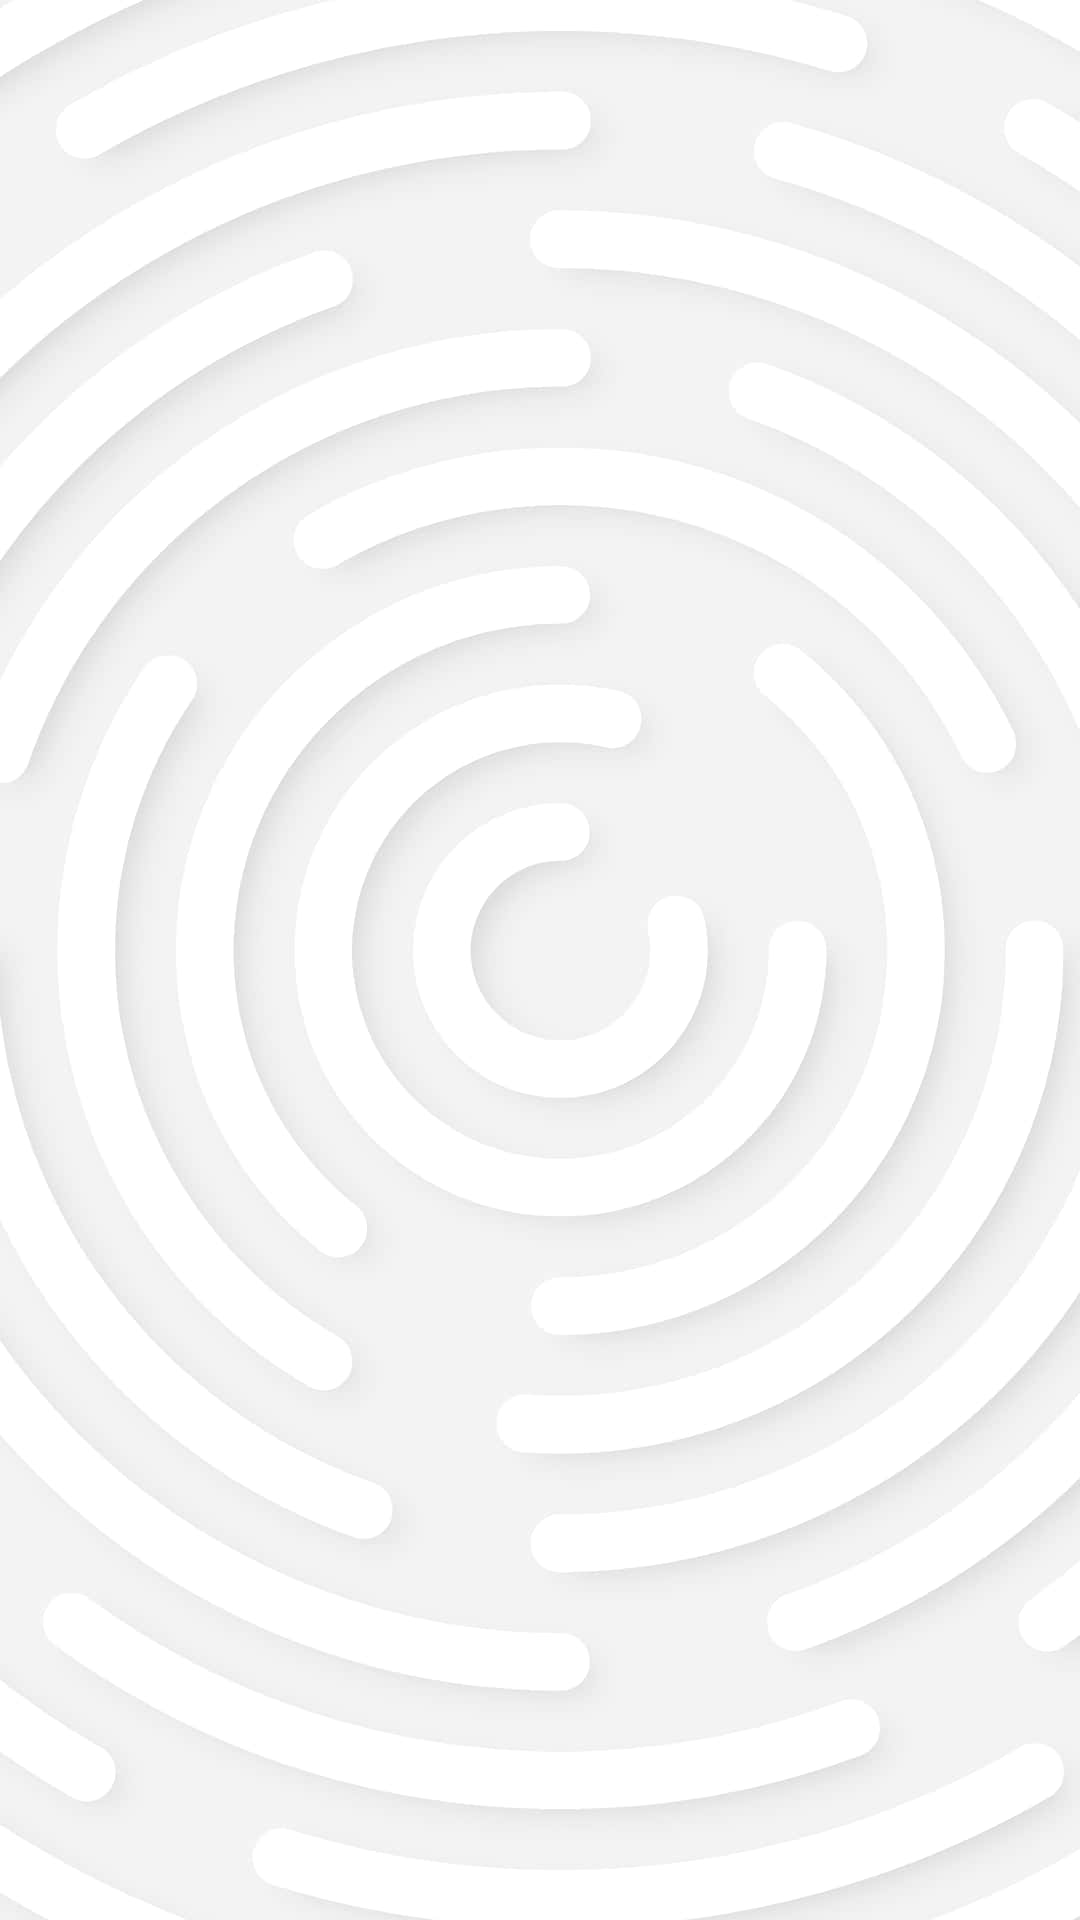 A White Spiral Pattern On A White Background Background